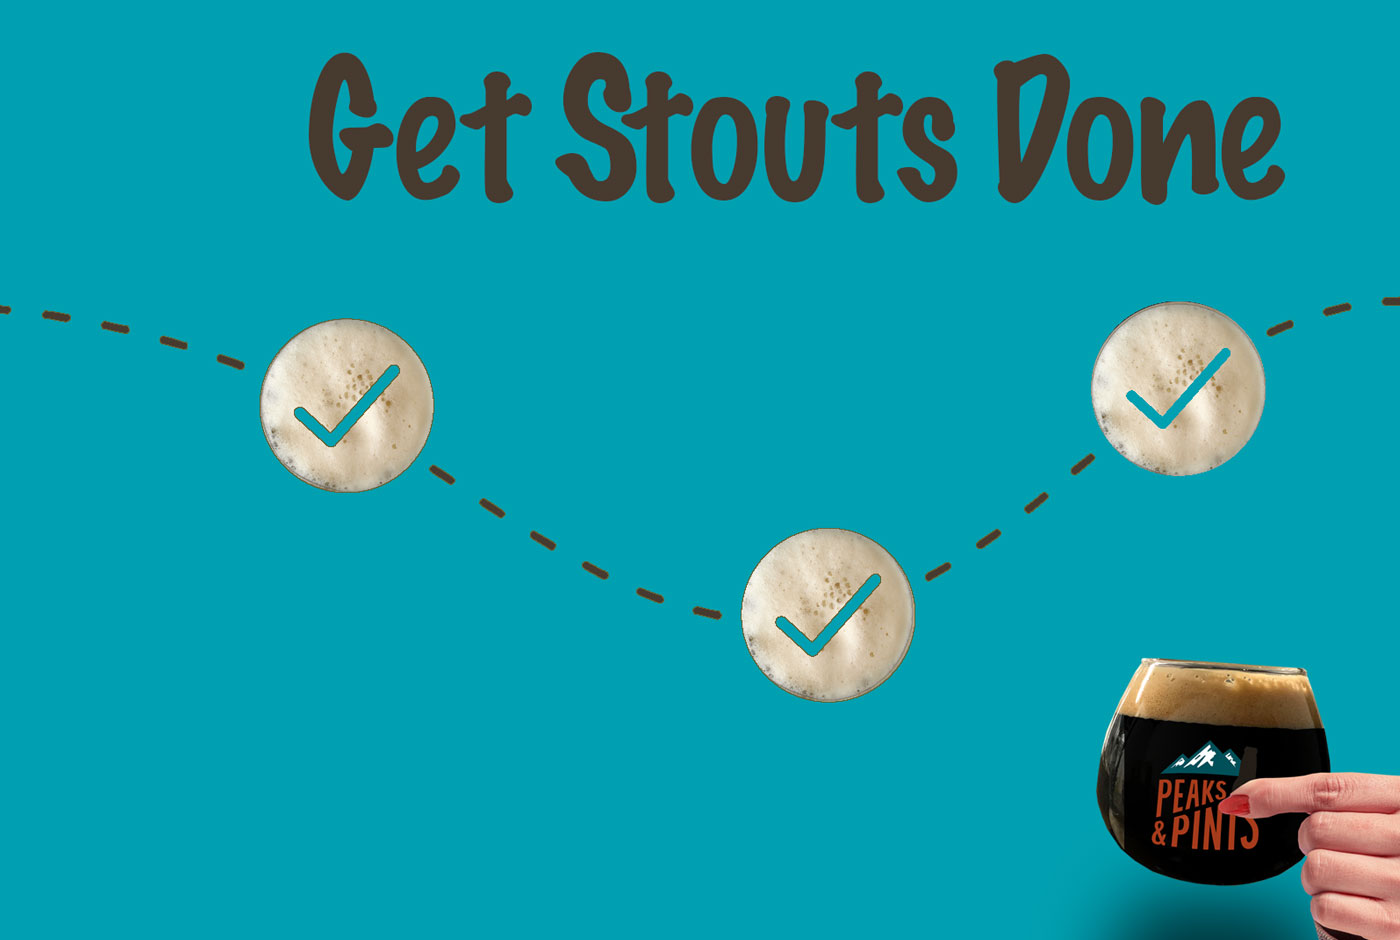 Peaks-and-Pints-February-Get-Stouts-Done-calendar